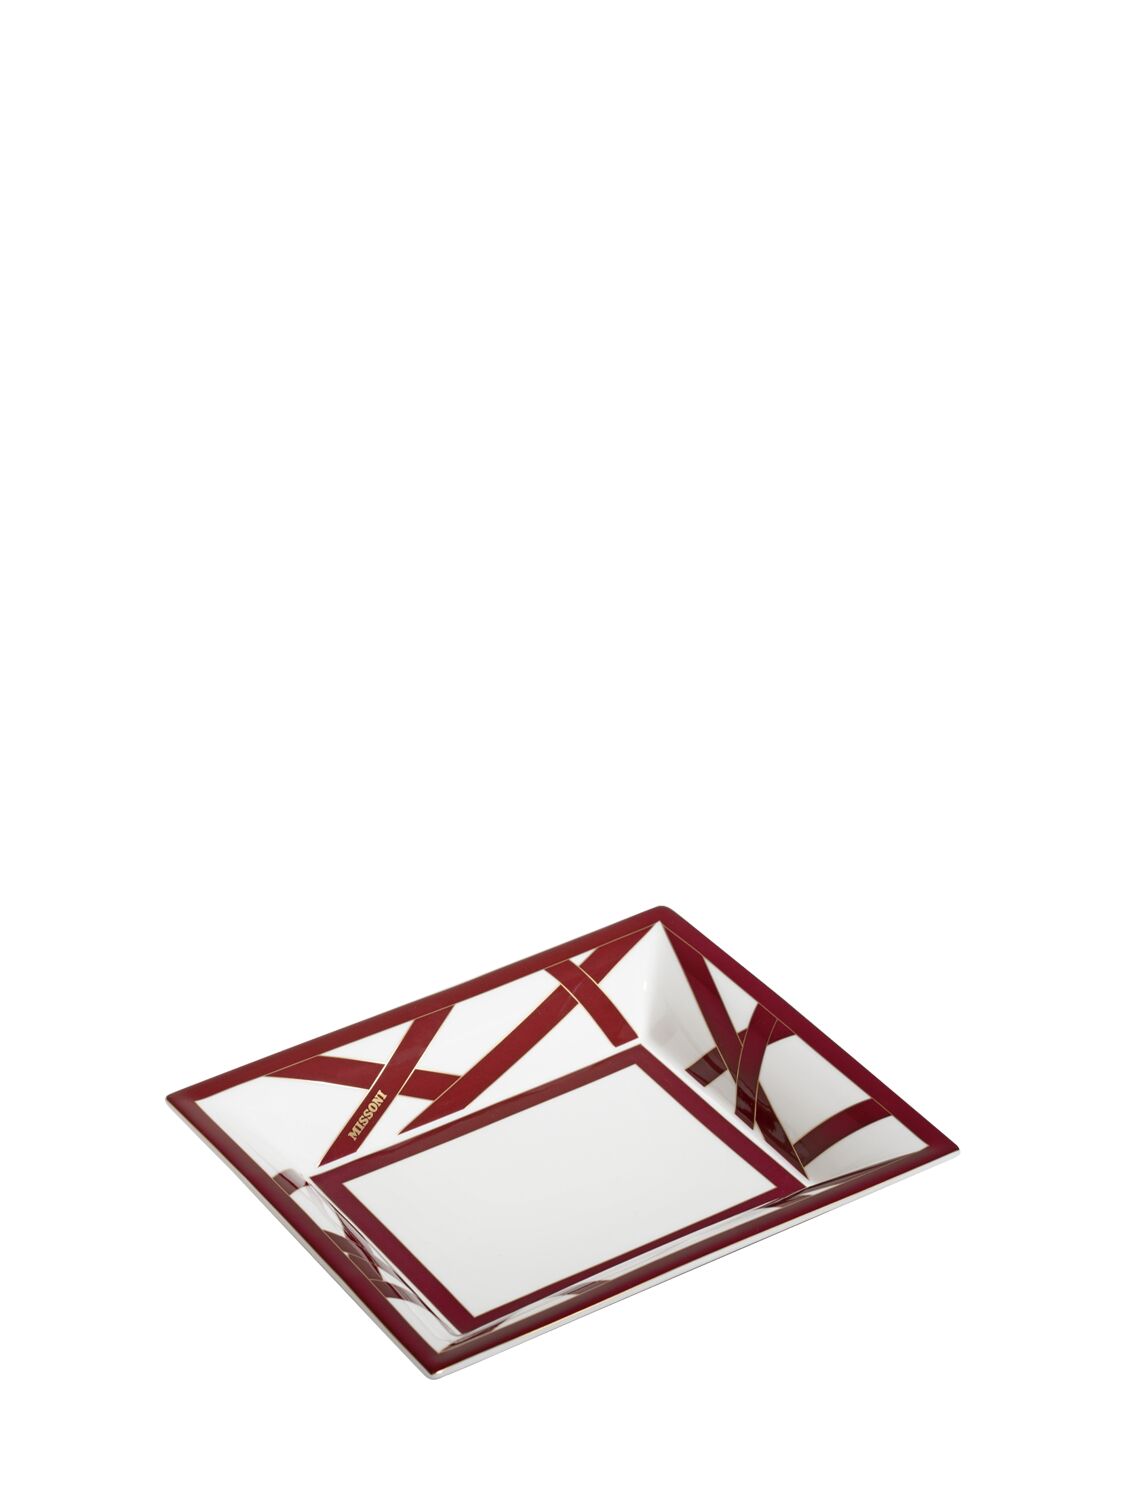 Missoni Home Collection Nastri Large Rectangular Tidy Tray In Red